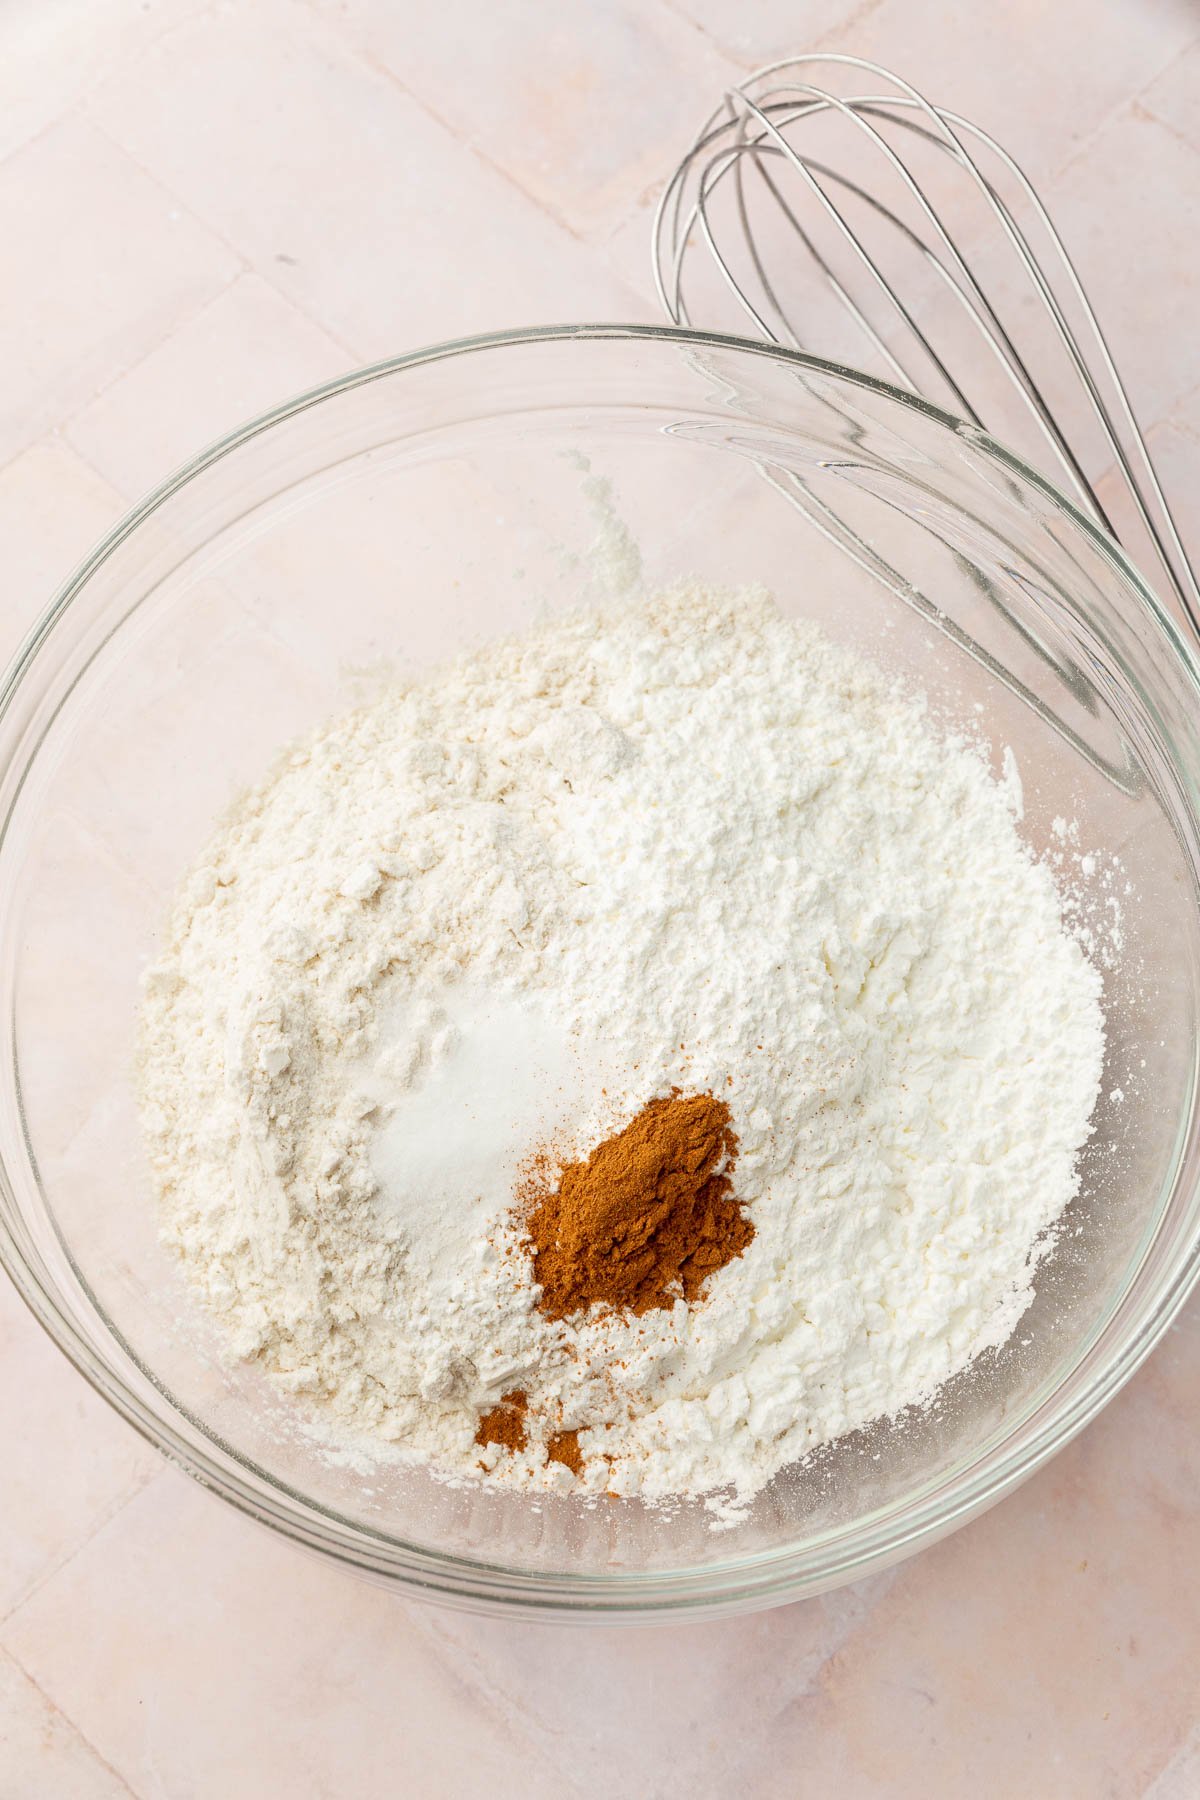 A glass mixing bowl with gluten-free flour, salt, cornstarch, and cinnamon in it before whisking together.